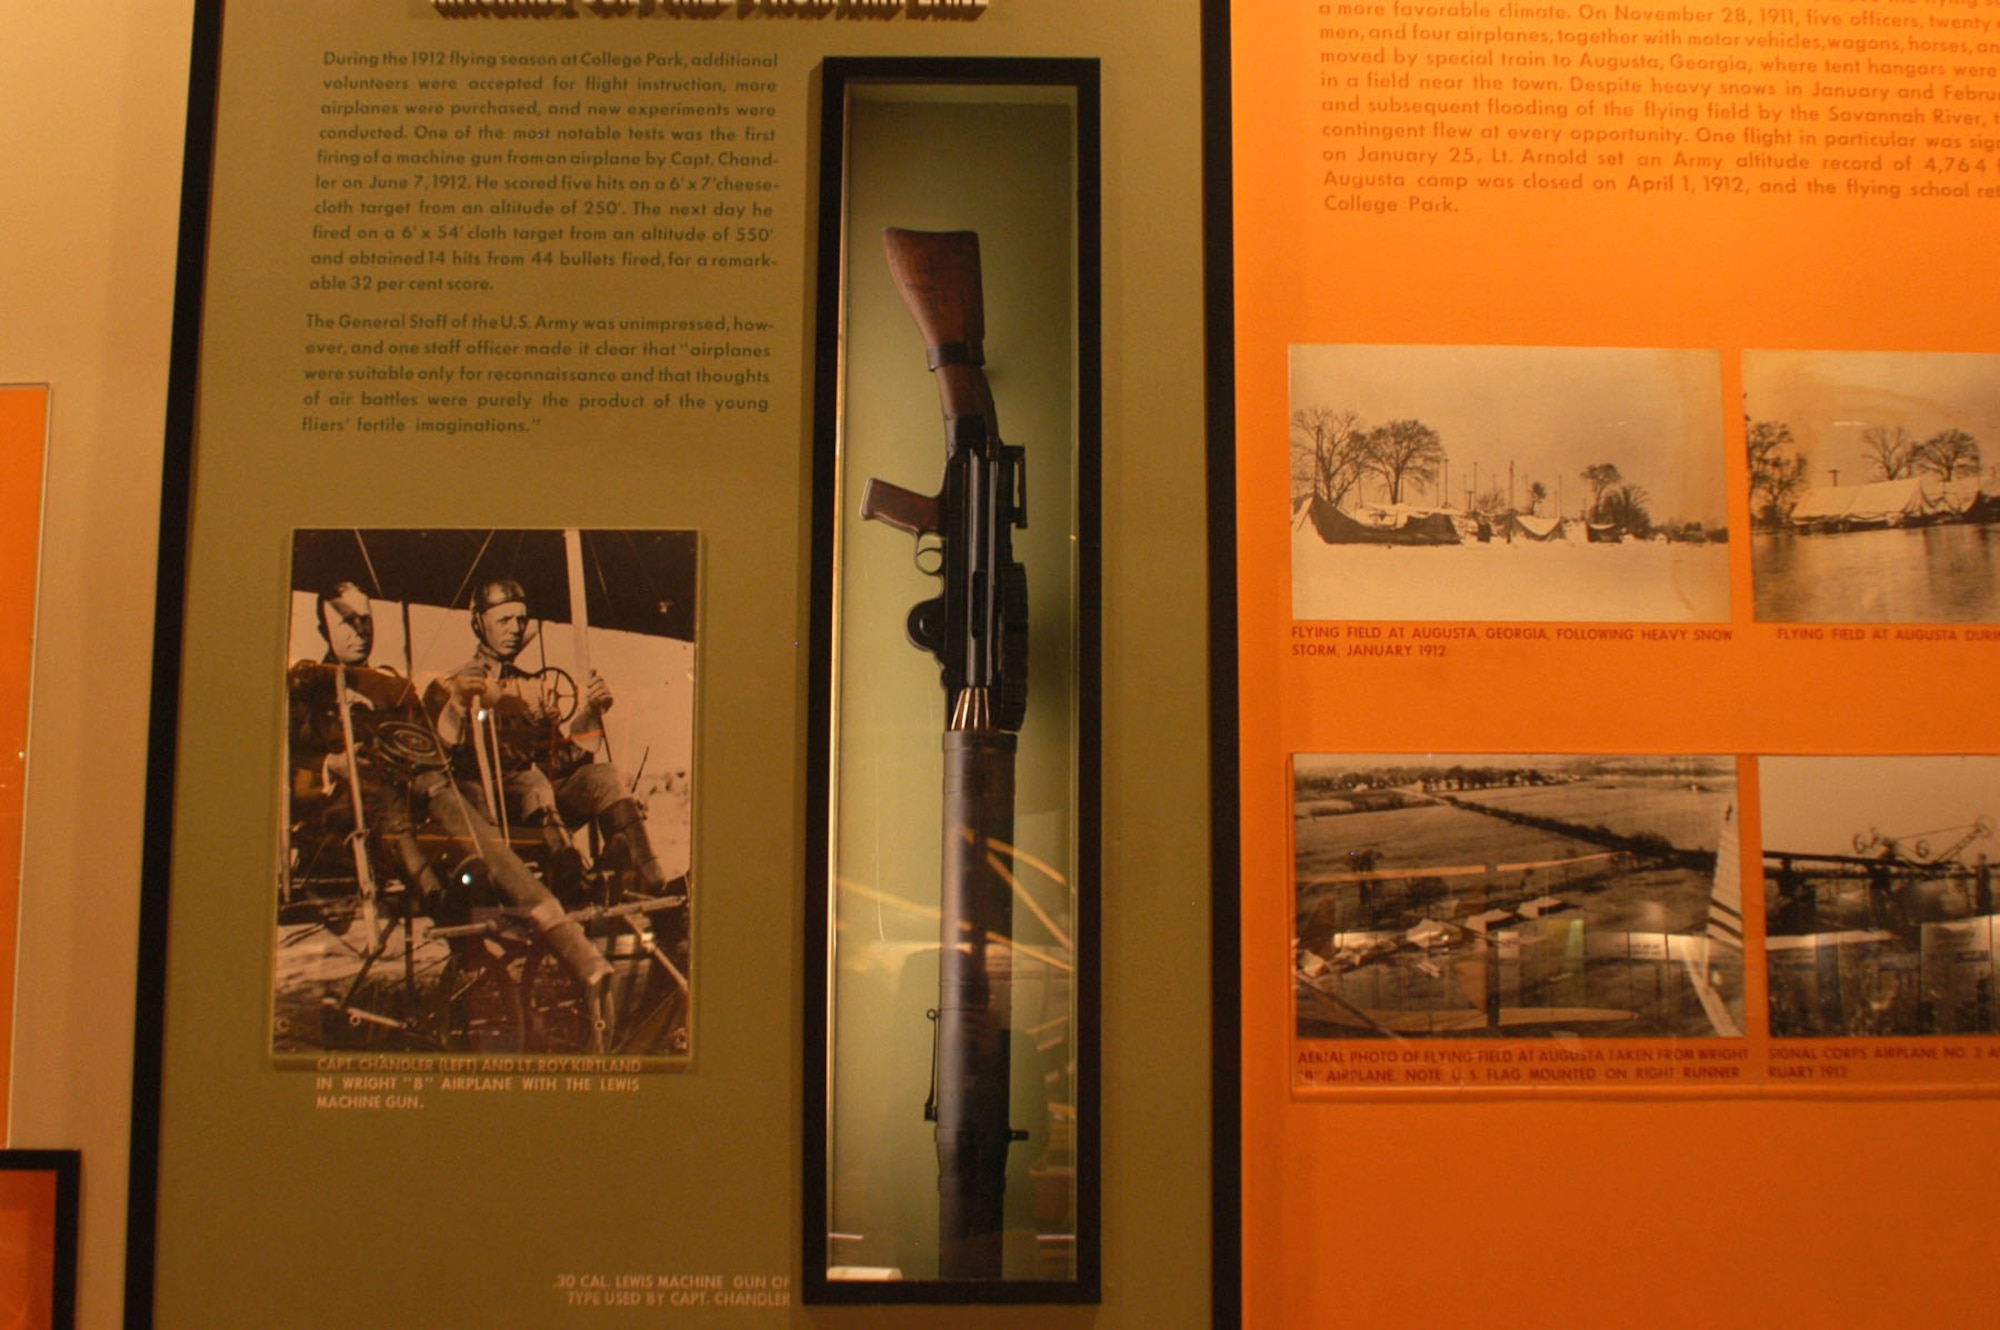 DAYTON, Ohio -- .30-cal. Lewis machine gun on display in the Early Years Gallery at the National Museum of the United States Air Force. (U.S. Air Force photo)